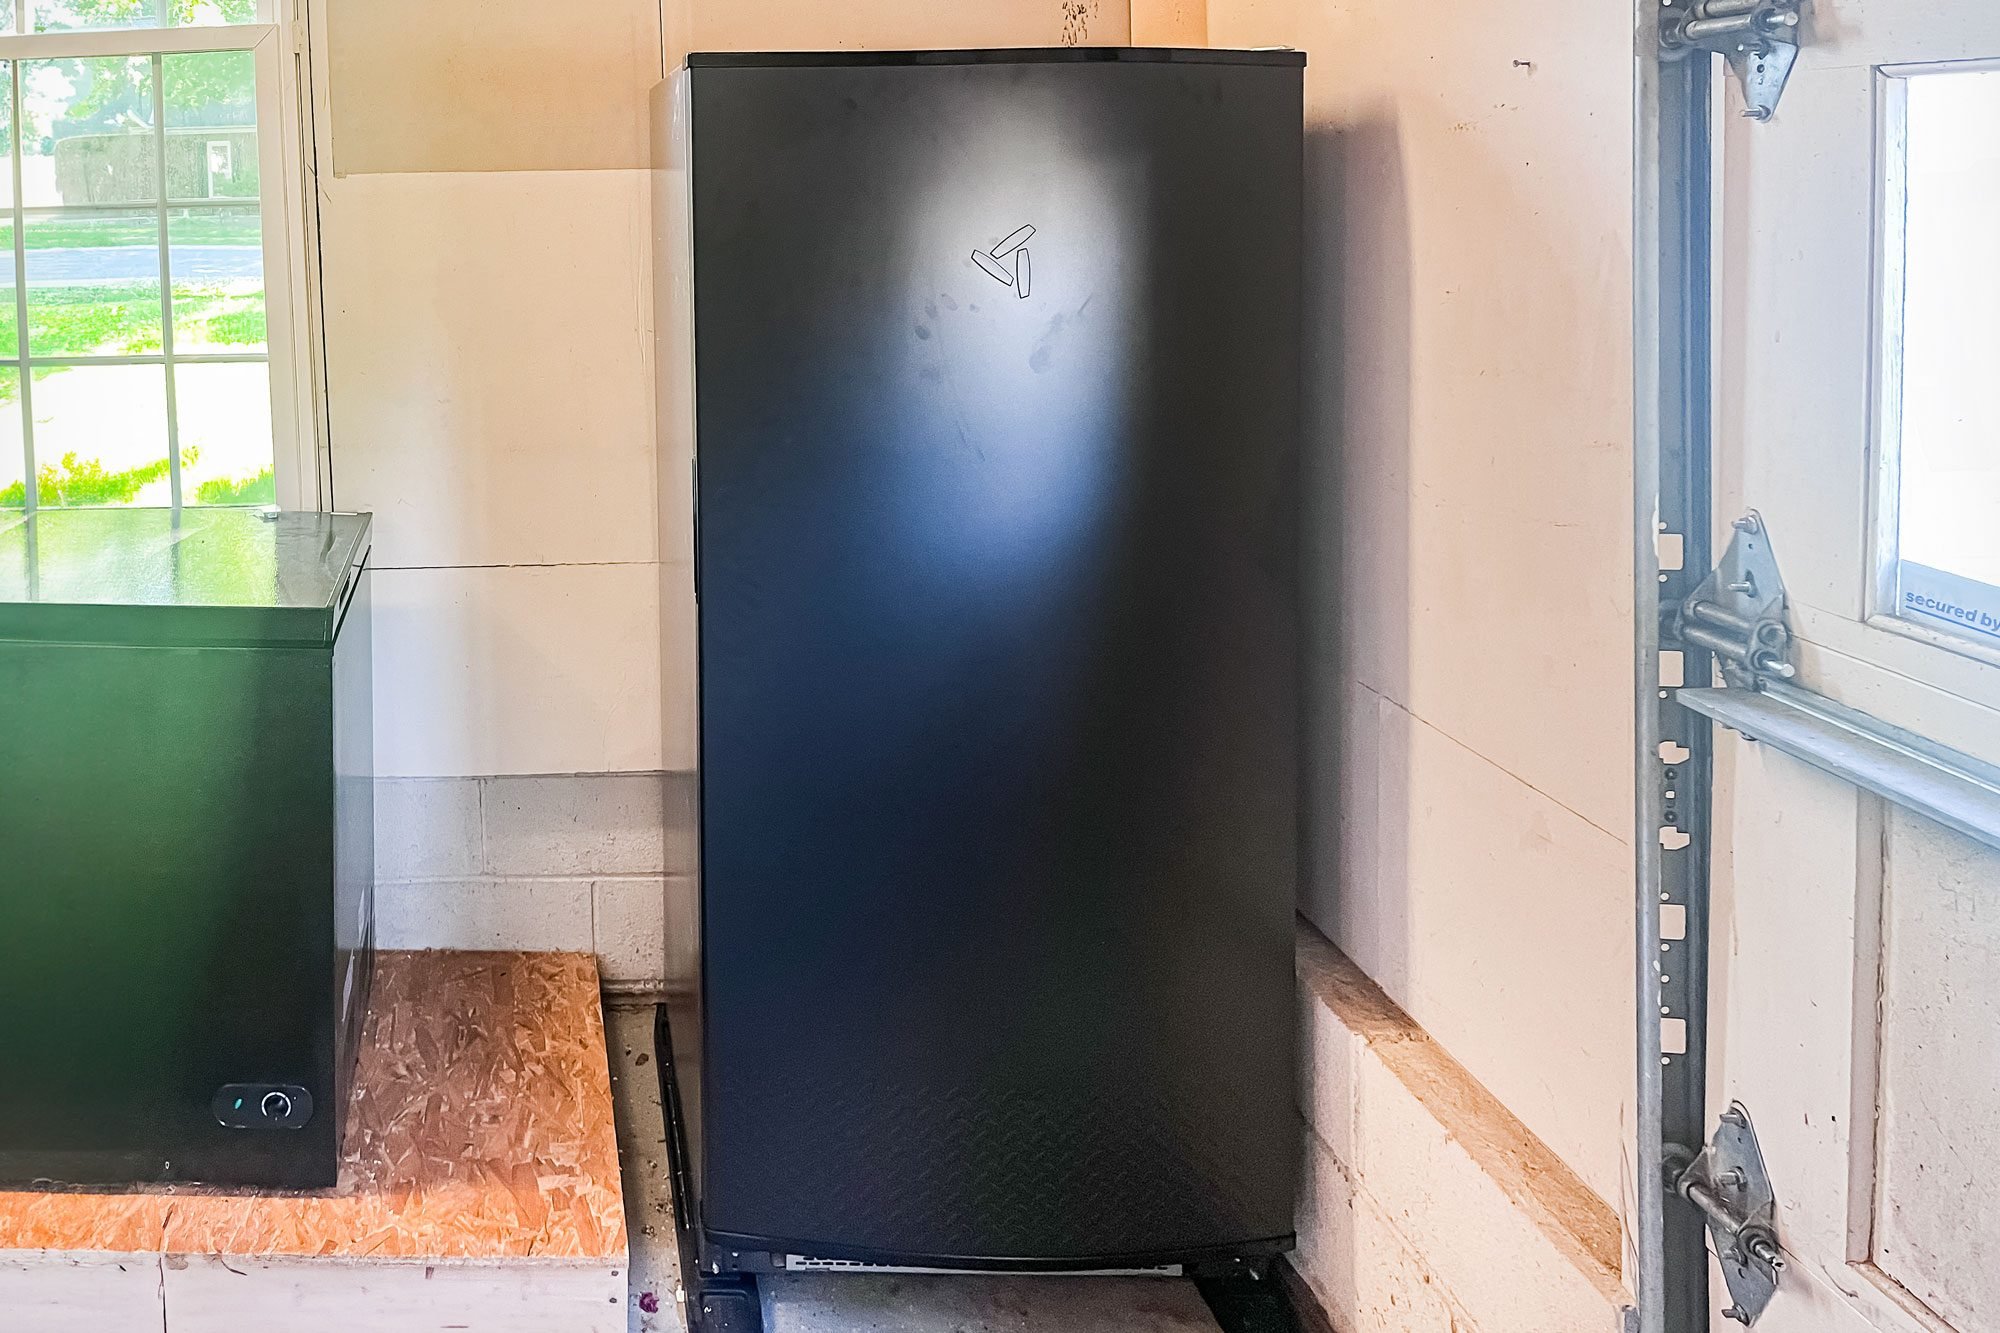 I Tried the Gladiator Refrigerator in My Garage, and Here Are My Unfiltered Thoughts